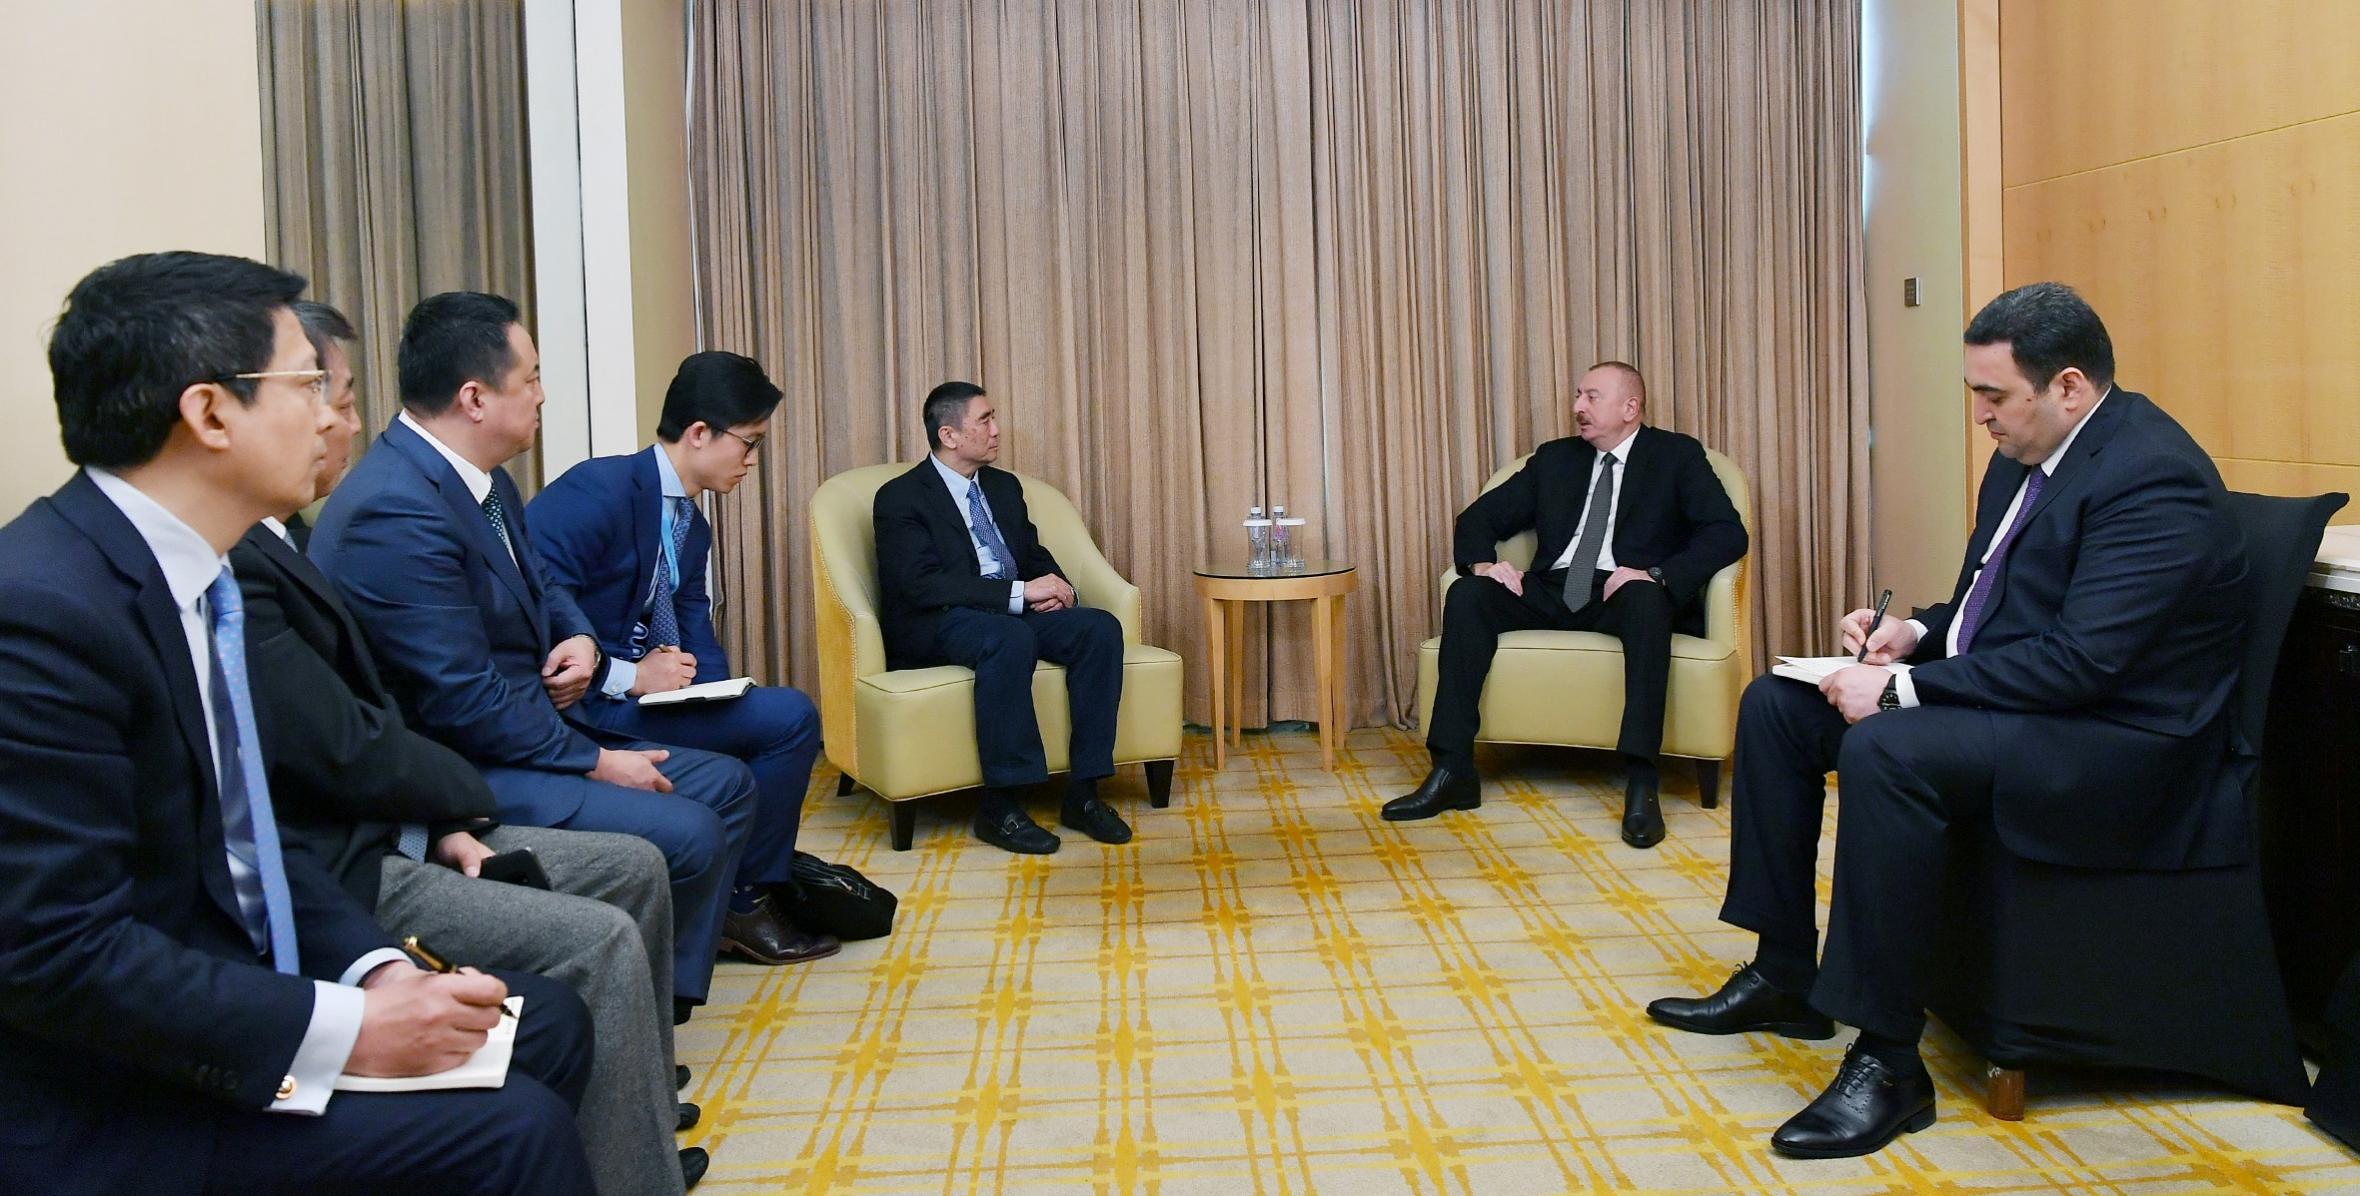 Ilham Aliyev met with China Poly Group chairman in Beijing